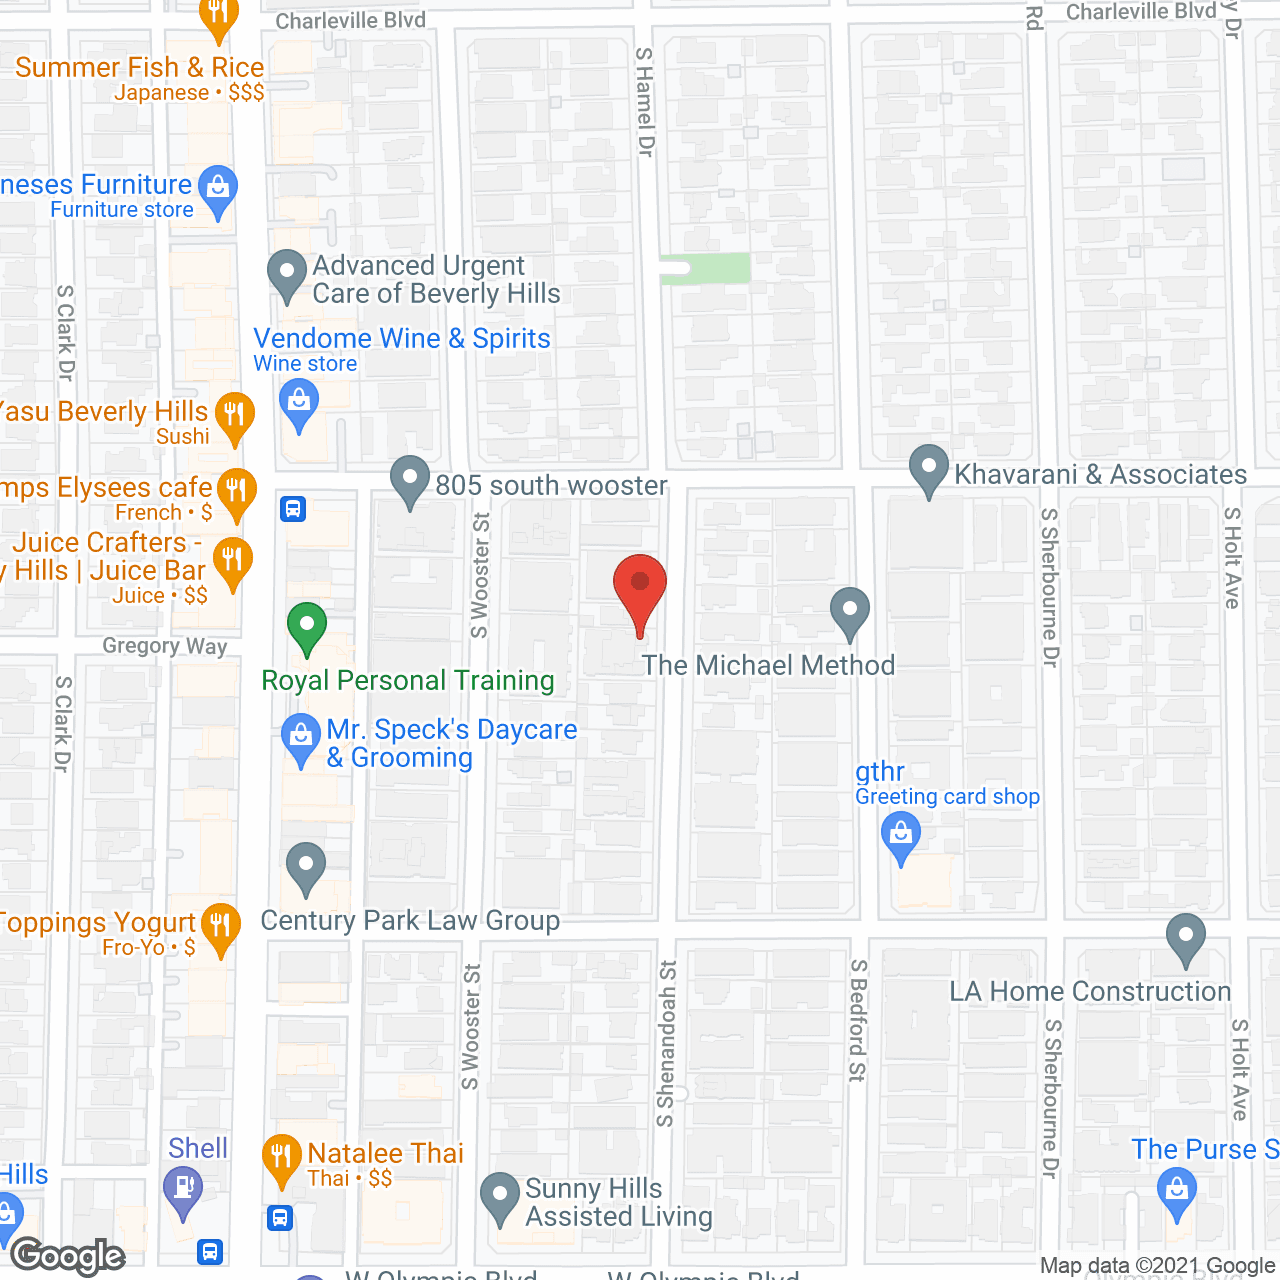 1Heart Caregiver Services Beverly Hills in google map